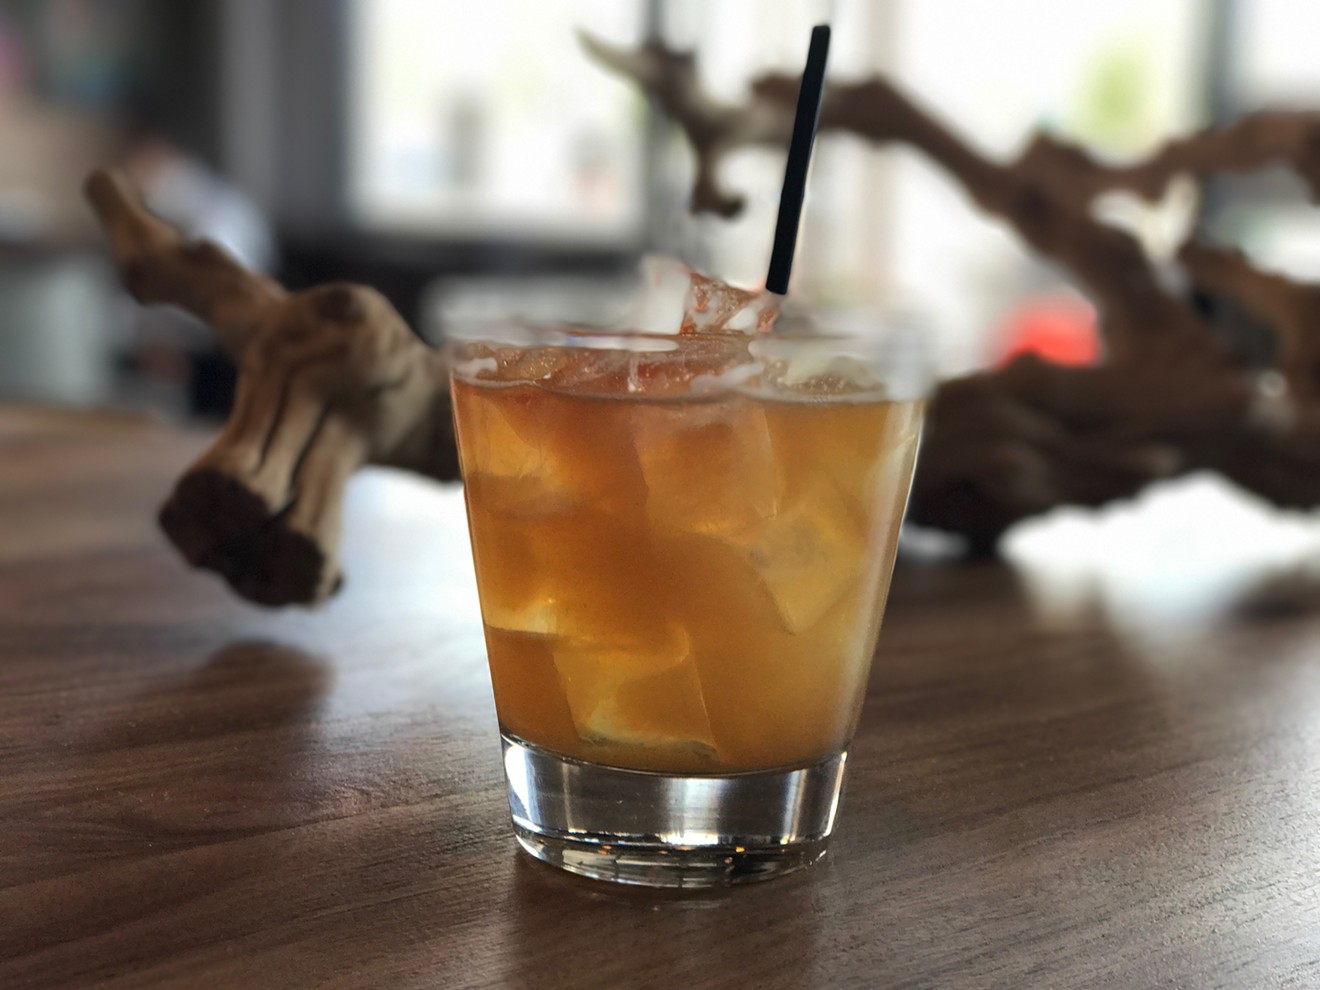 Grab a (well) drink, for just $2 during these two hours on the Cedar Springs Strip.